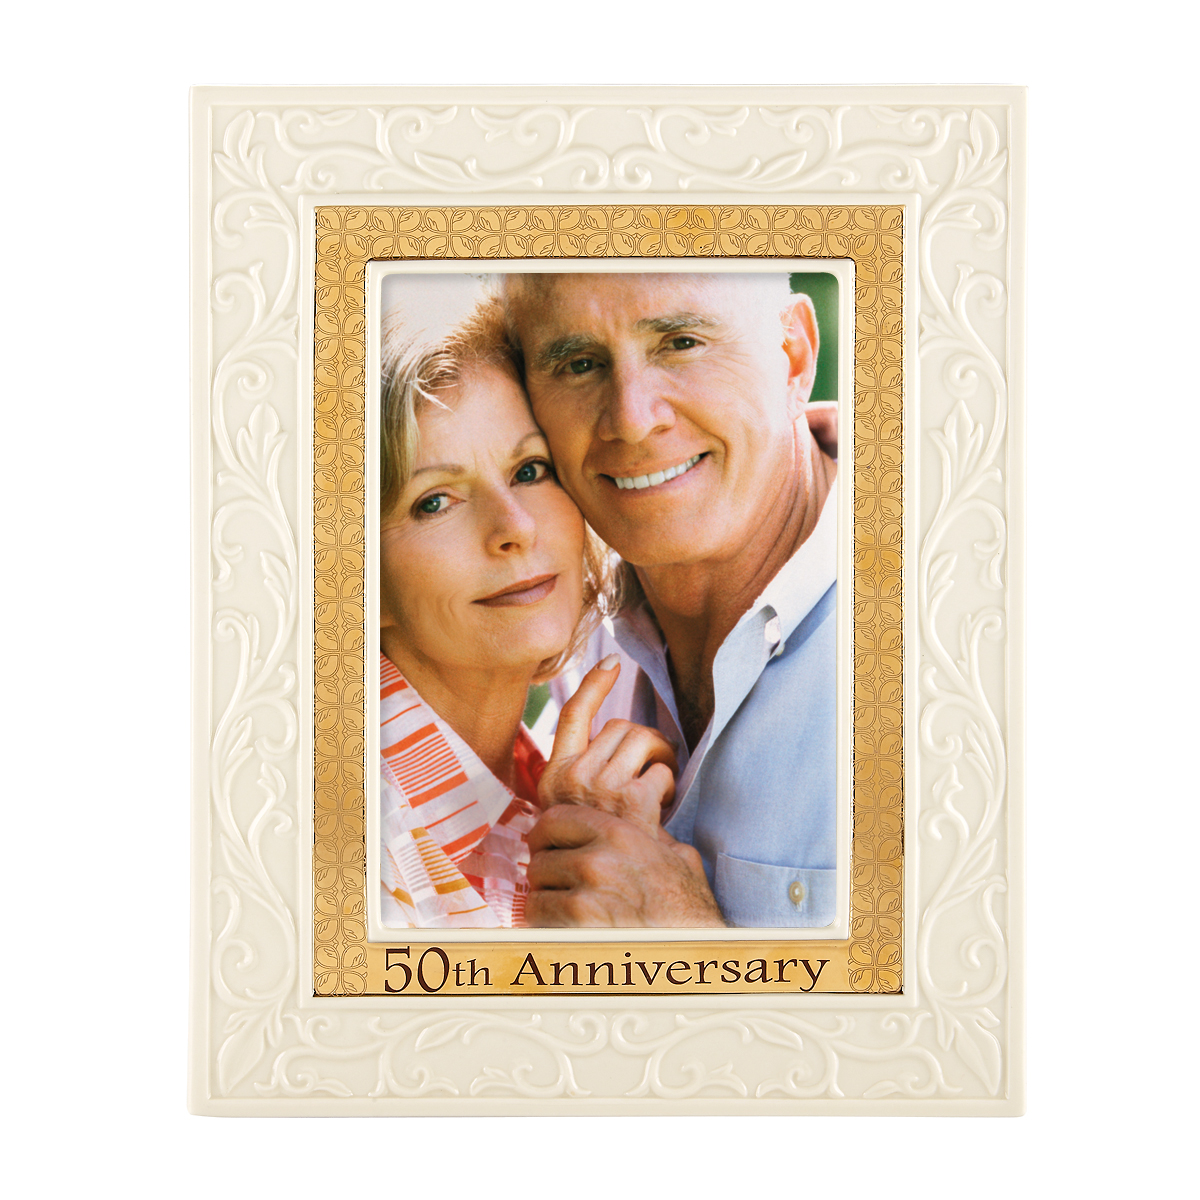 Lenox 50th Anniversary 5X7" Picture Frame